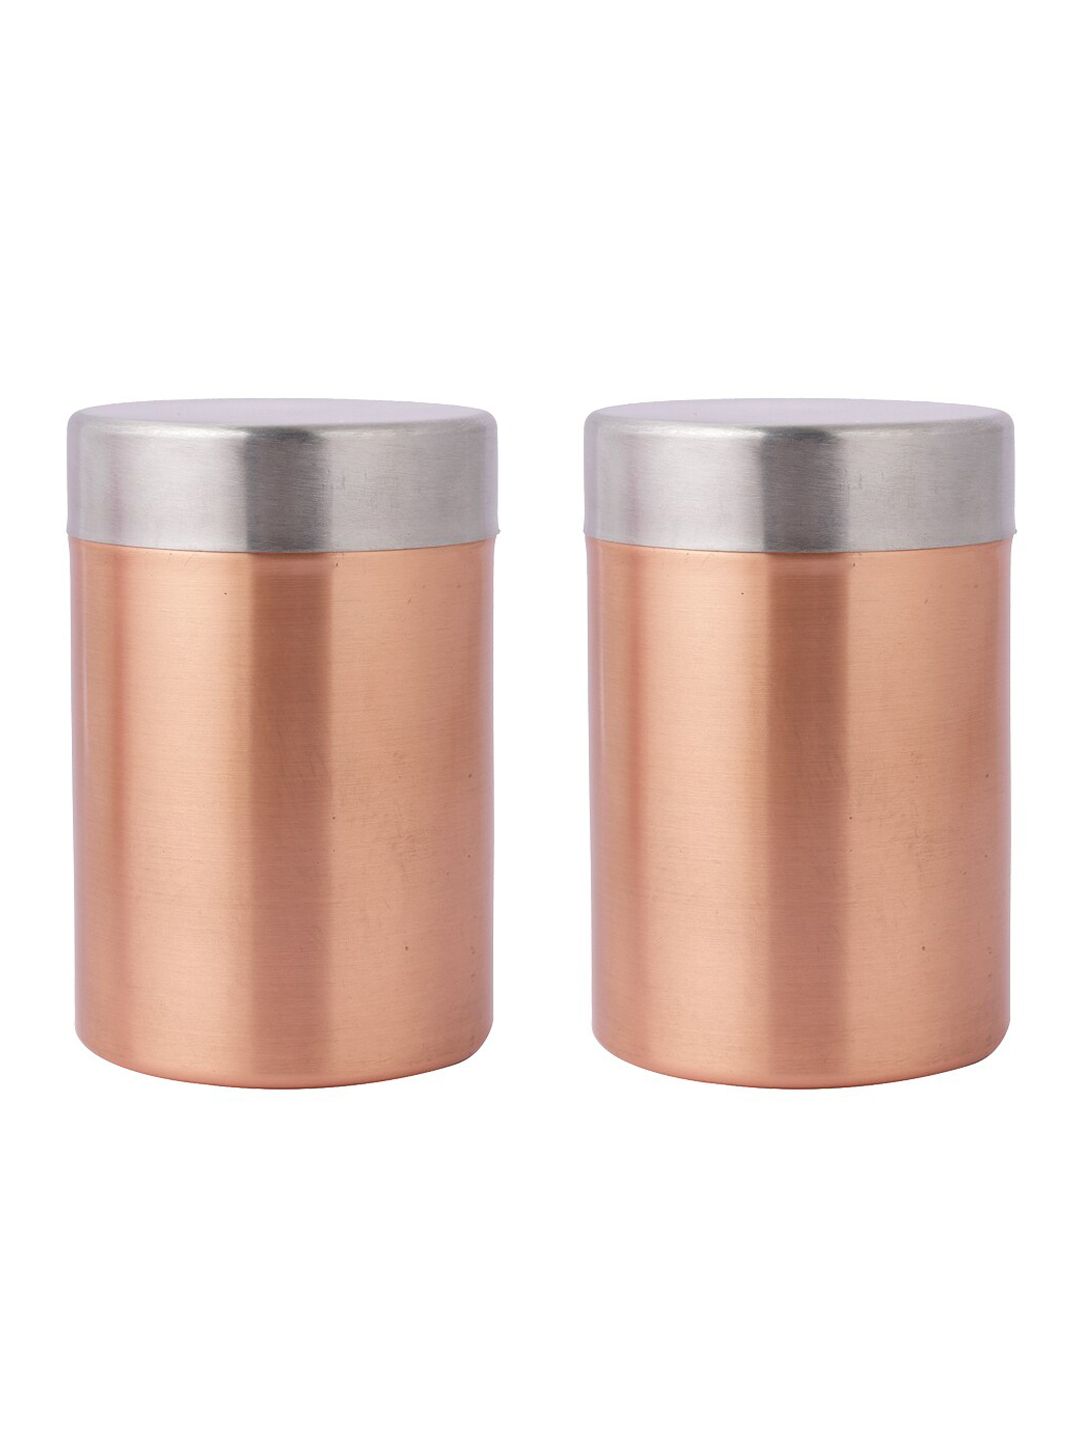 Abode Pack Of 2 Sober Copper Stainless Steel Storage Container 450ML Price in India